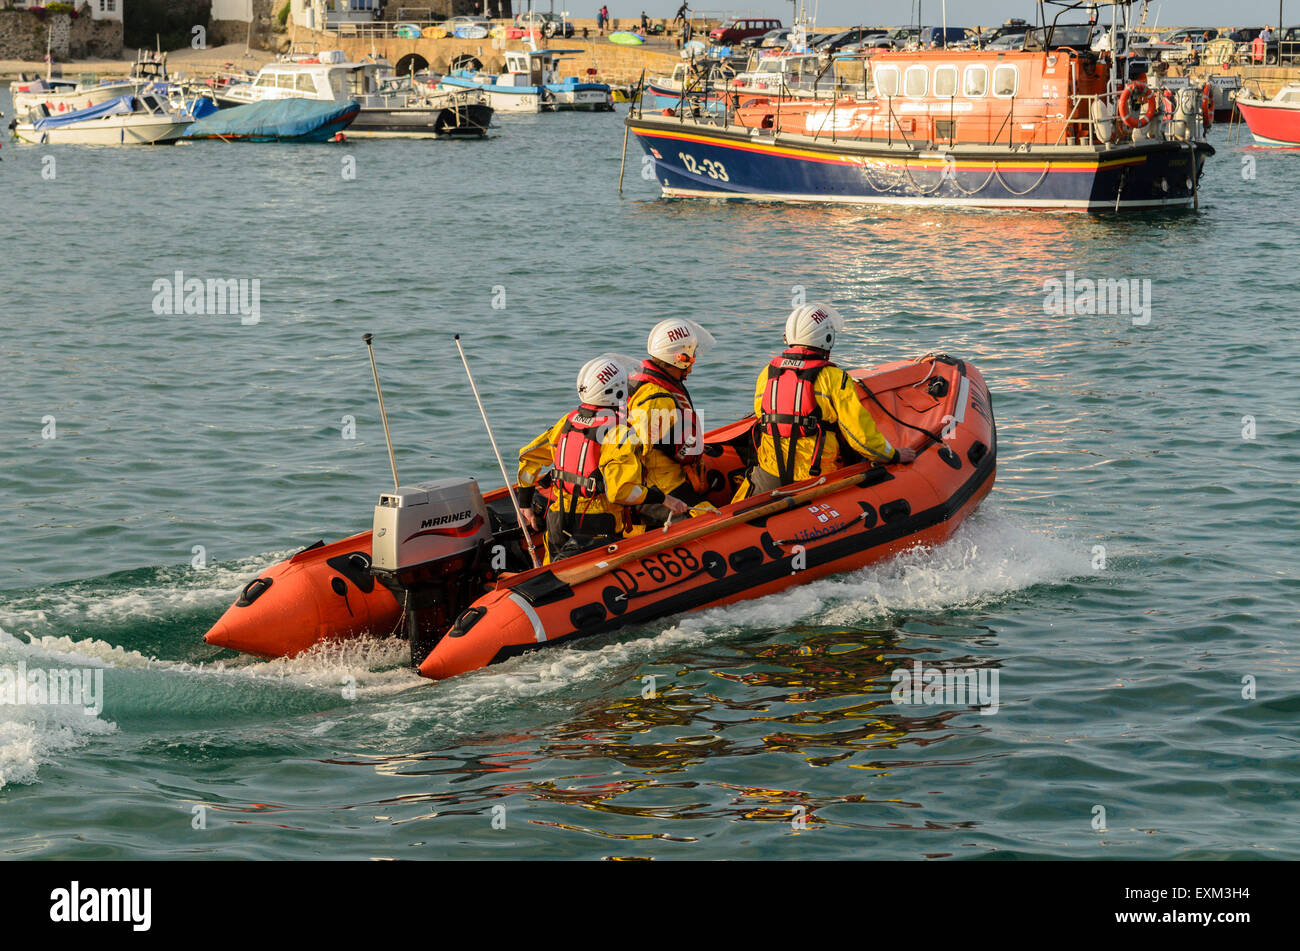 RNLI inshore Lifeboat passing the Offshore Lifeboat in the harbour, St Ives, Cornwall, England, U.K. Stock Photo